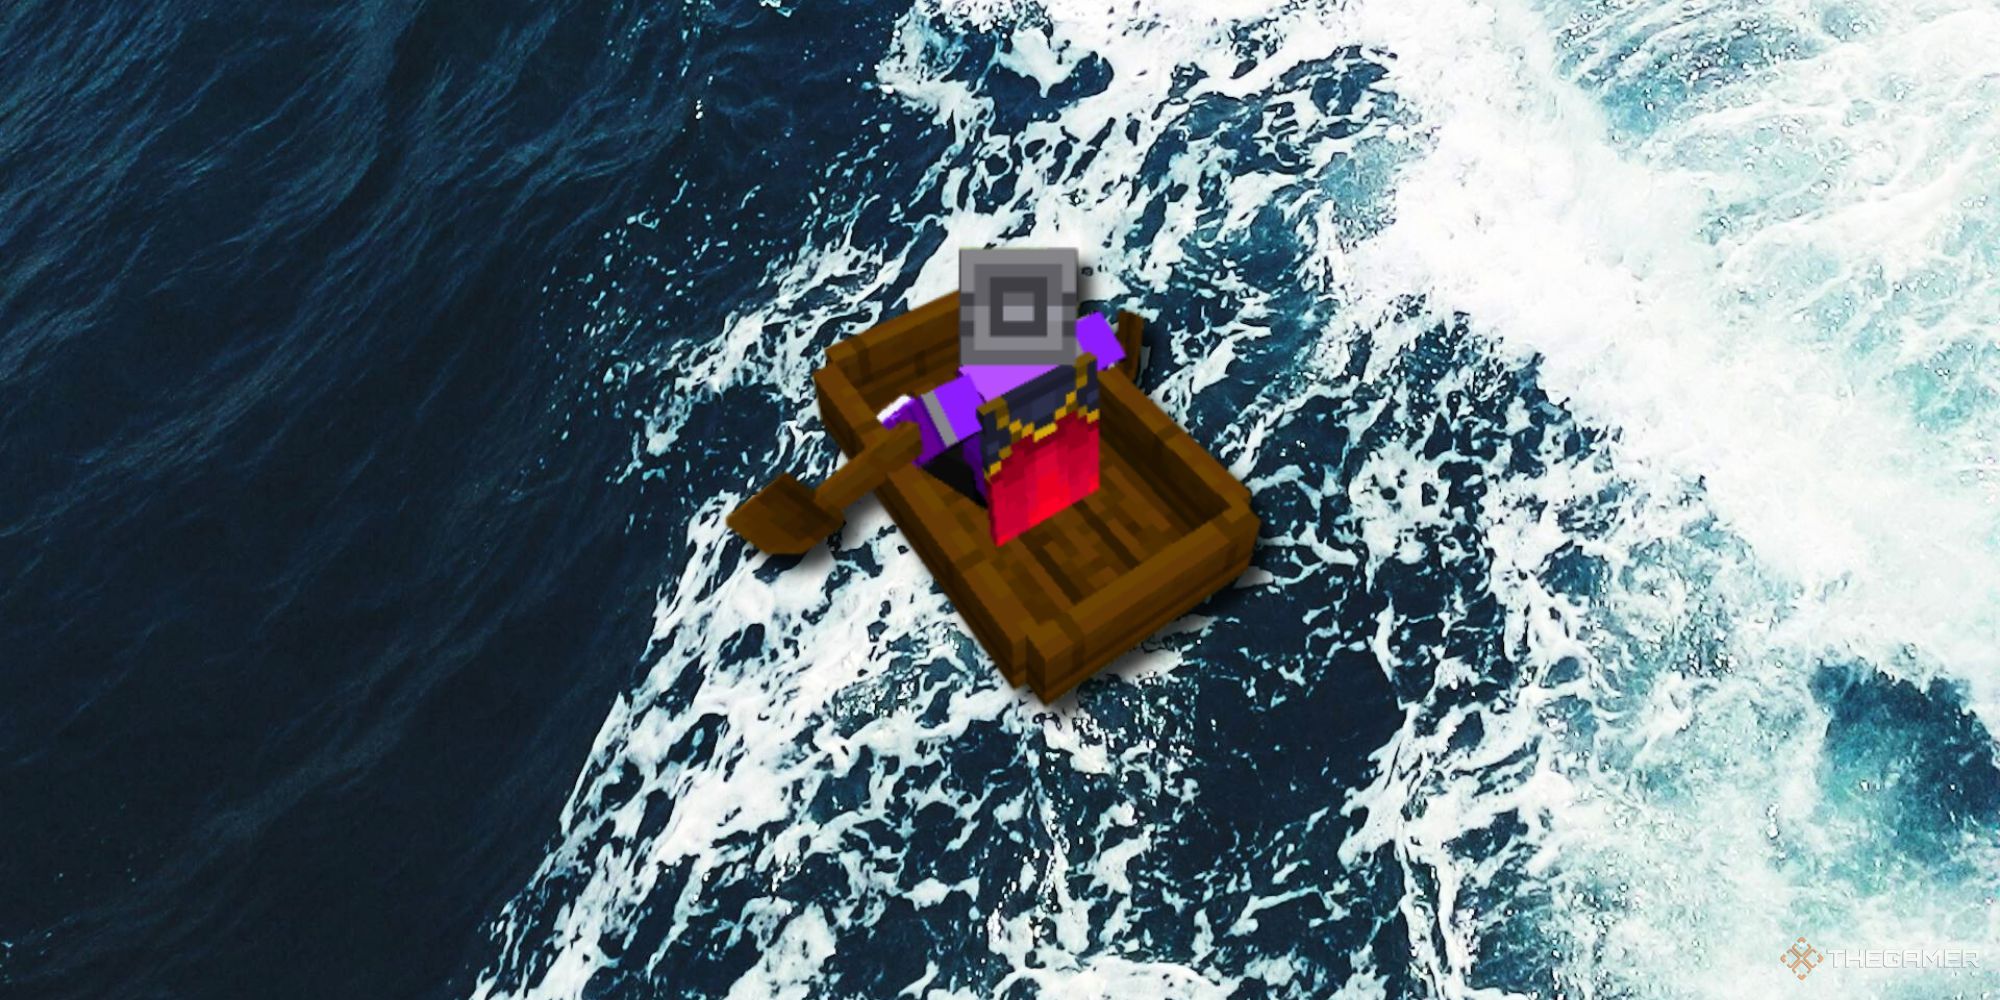 A player on a dark oak boat overlayed on top of a real photo of the ocean.